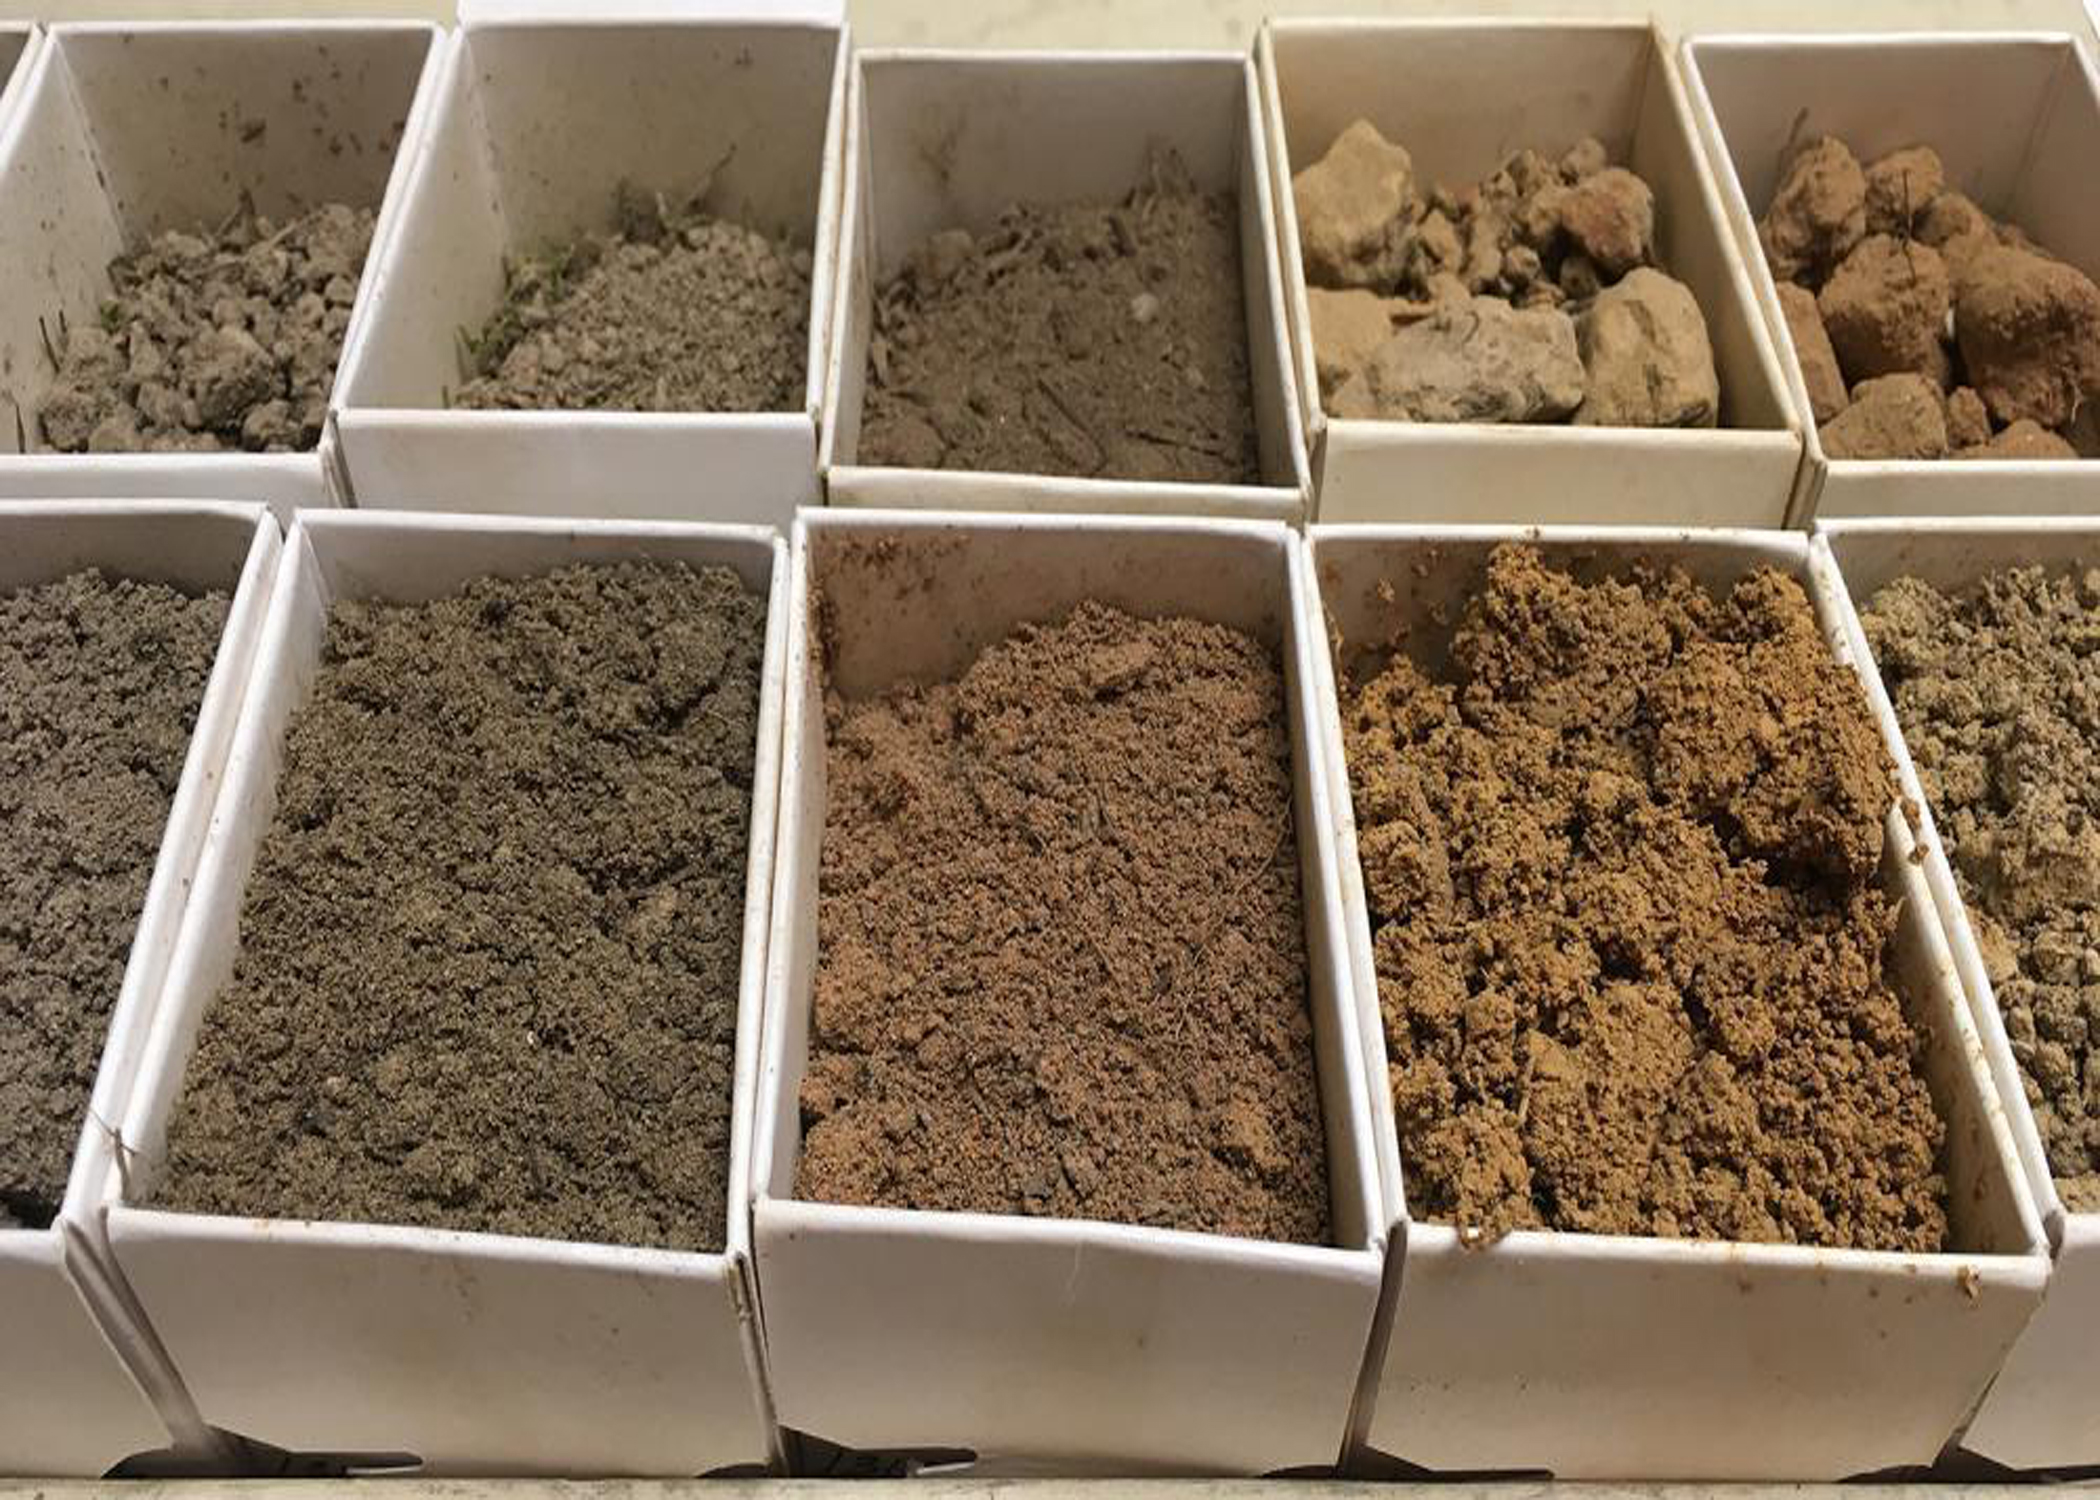 Boxes of soil samples line a table.